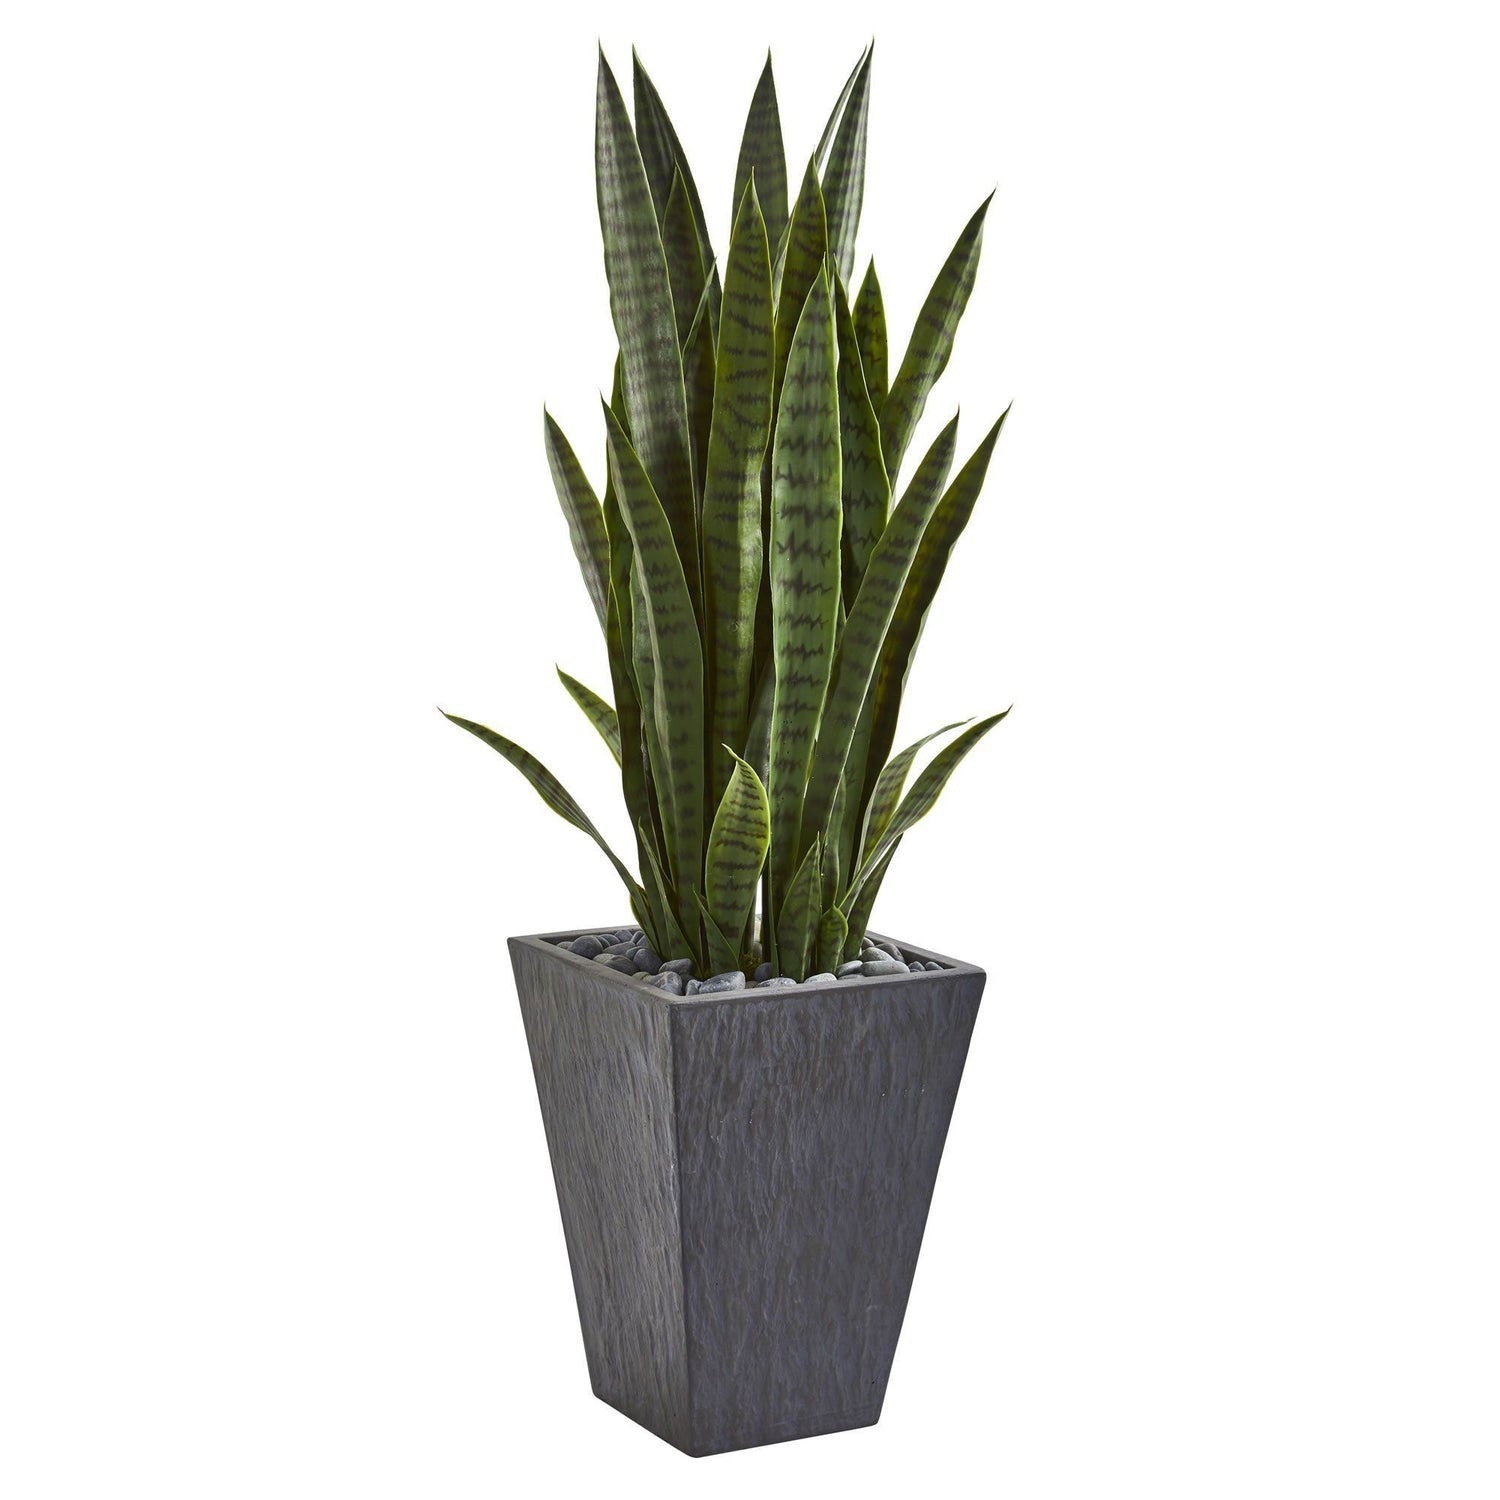 DUZYXI Artificial Snake Plants 16 with White Ceramic Pot Sansevieria Plant  Fake Snake Plant Greenery Faux Snake Plant in Pot for Home Office Living  Room Housewarming Gifts Indoor Outdoor Decor-Green: Buy Online